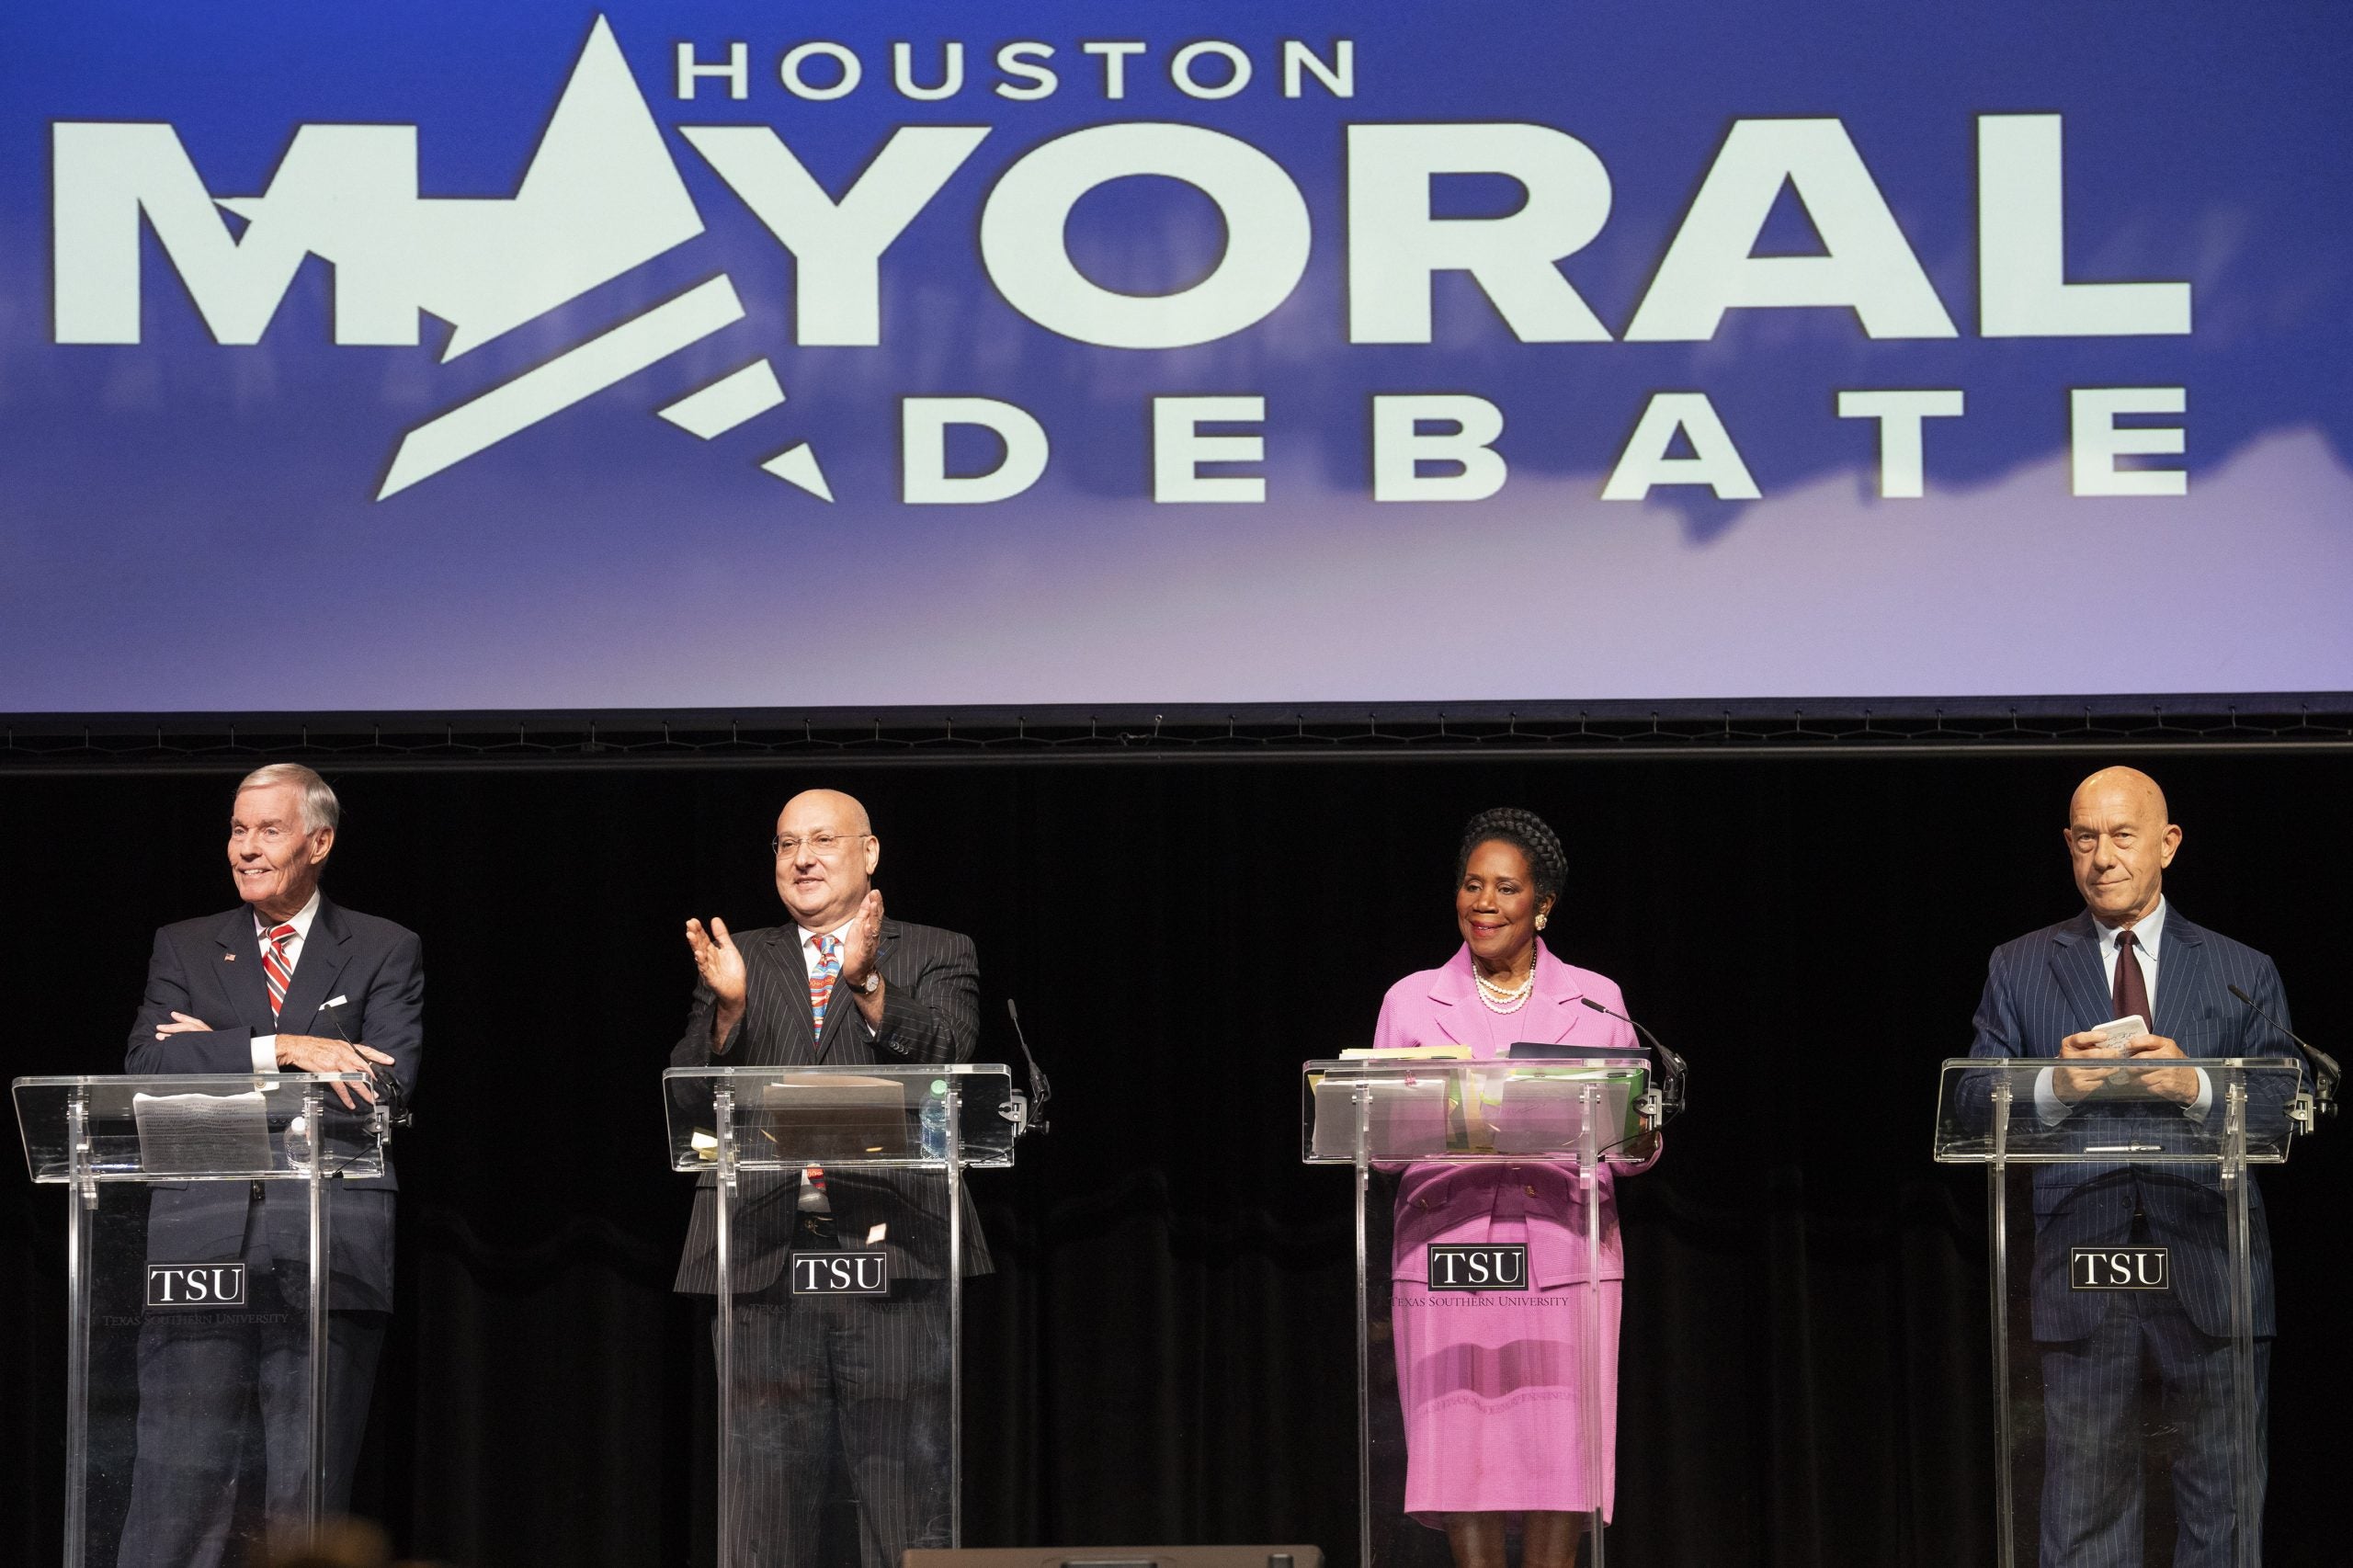 The Runoff Election For The Next Mayor Of Houston Is Between Congresswoman Sheila Jackson Lee And State Senator John Whitmire